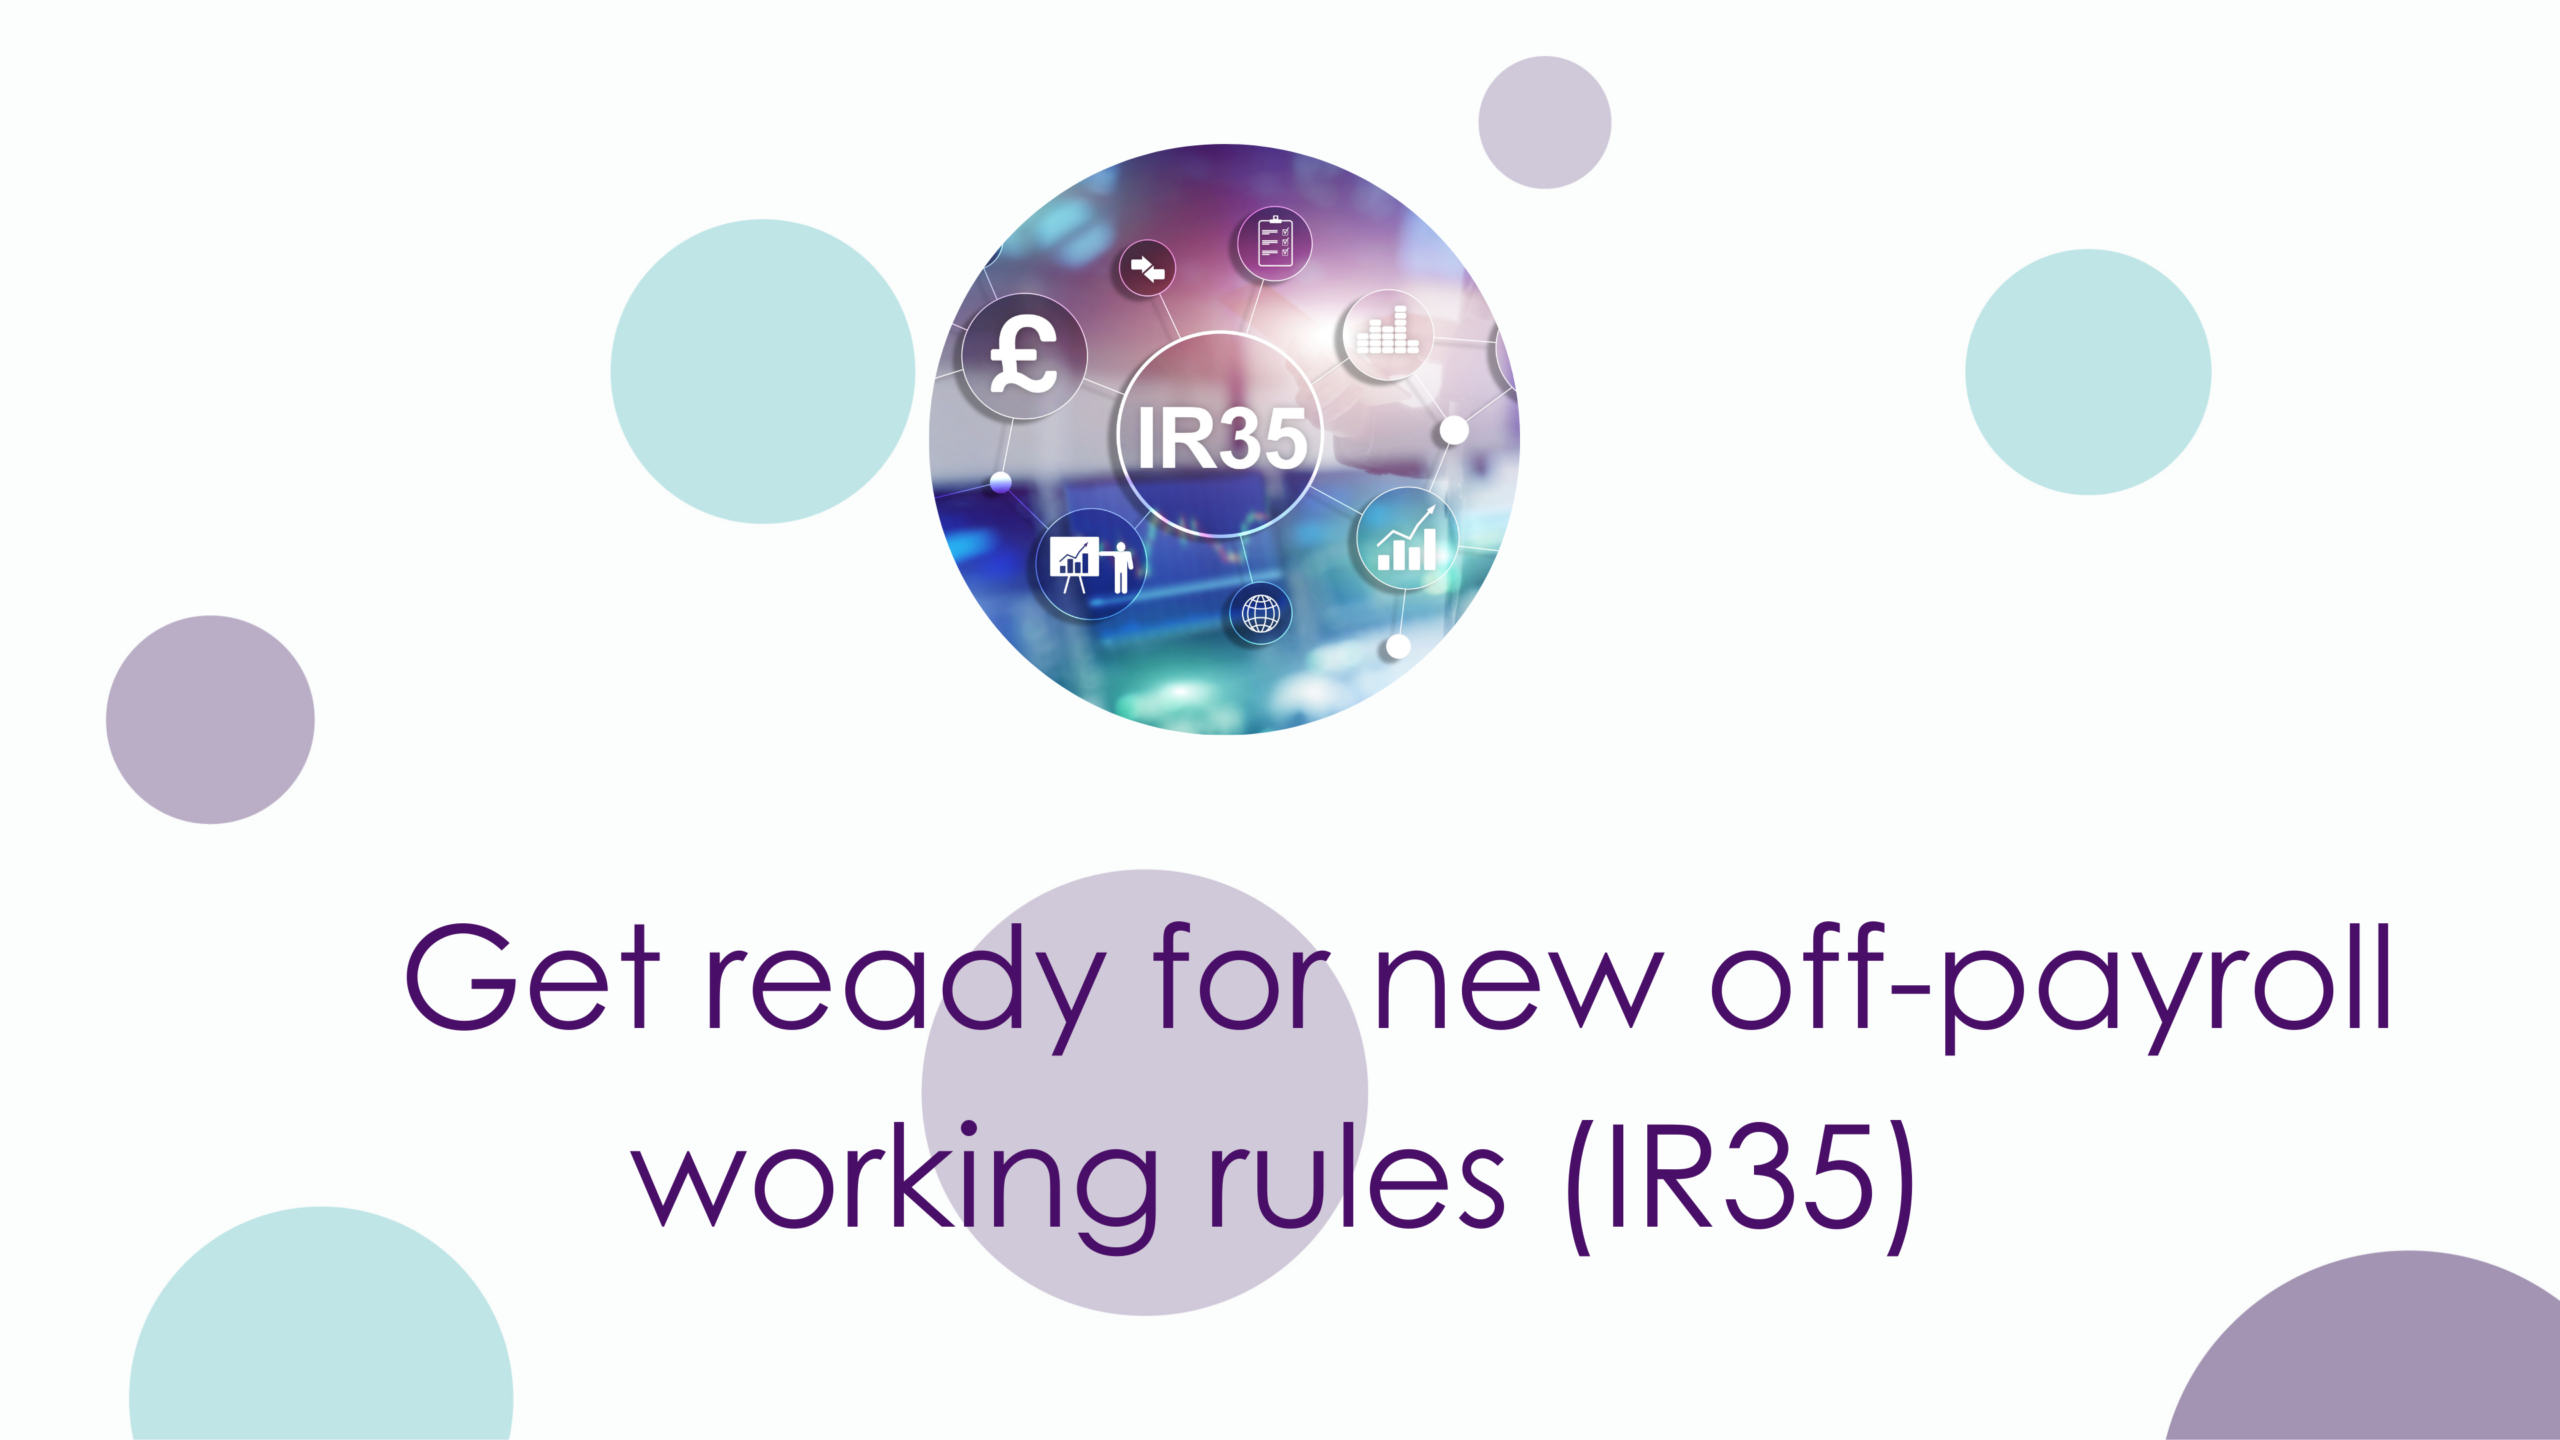 Get ready for new off-payroll working rules (IR35)